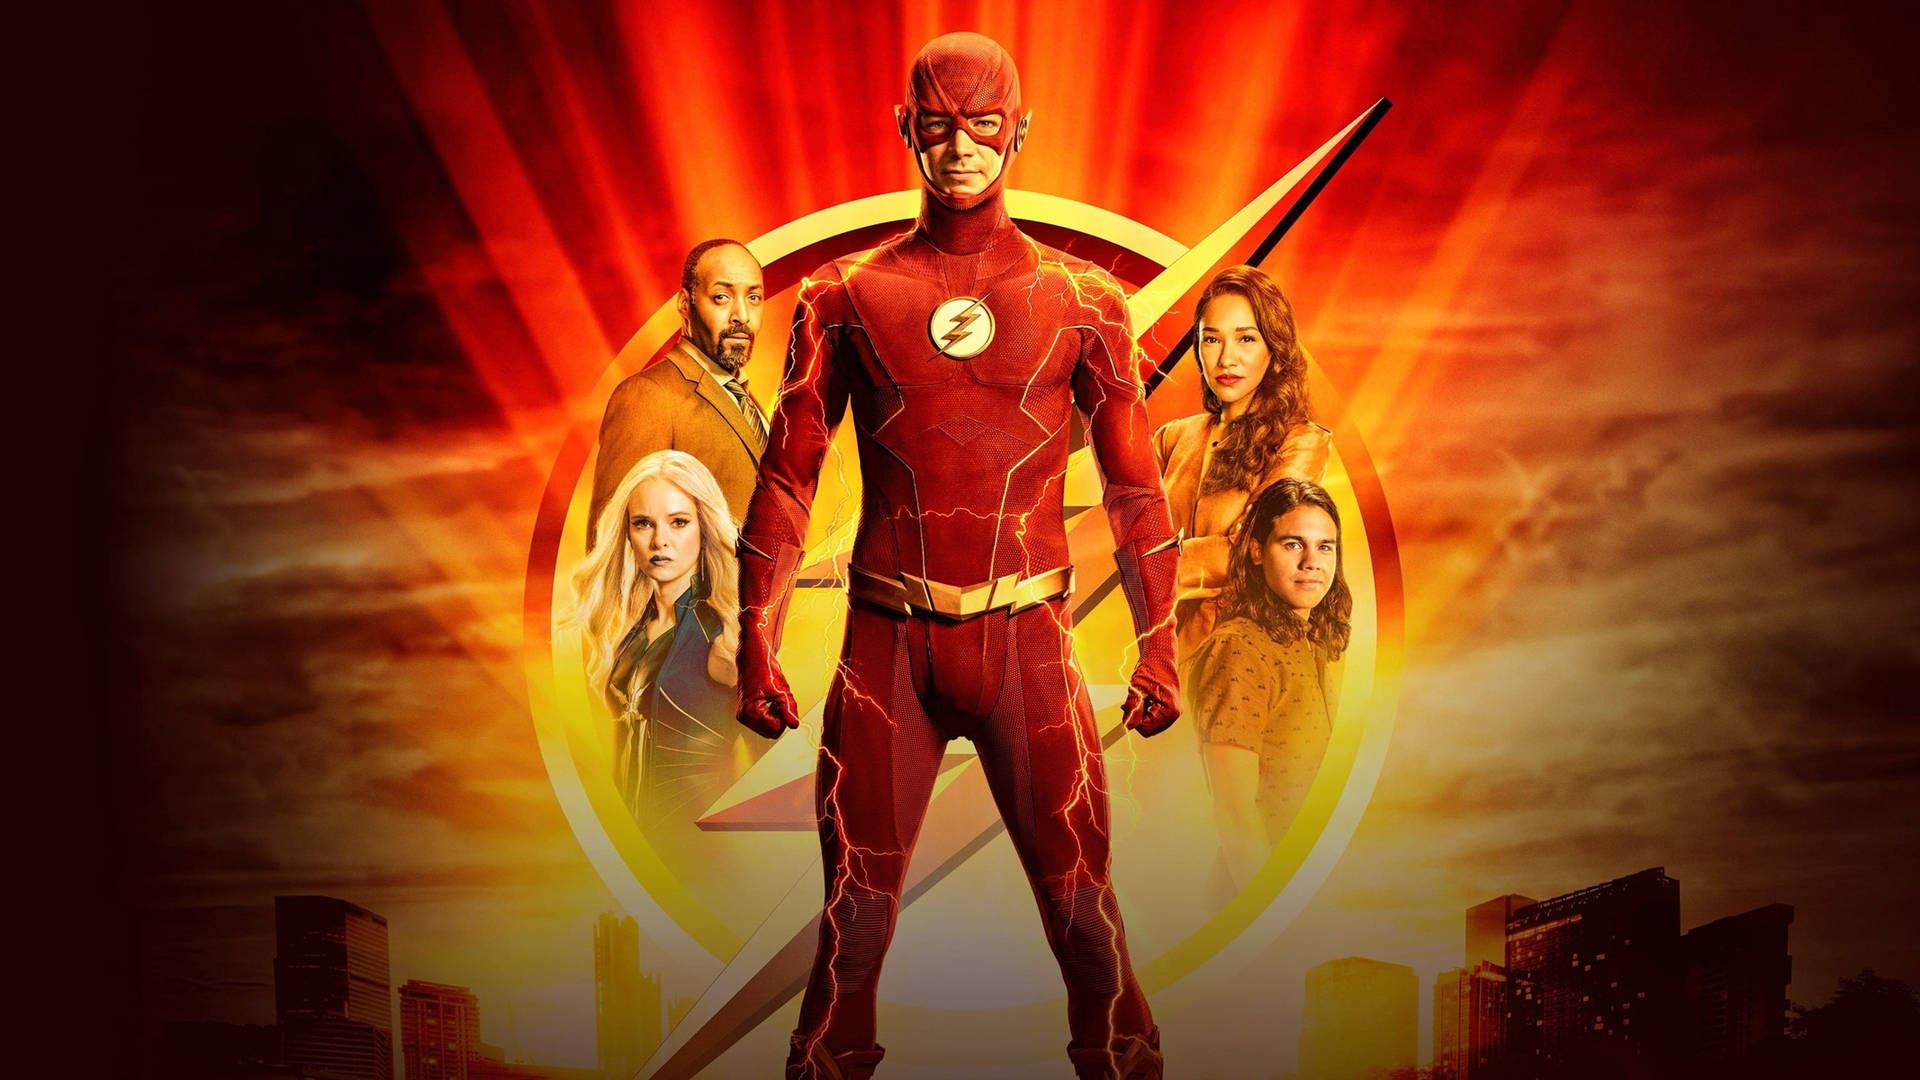 Free The Flash Movie Wallpaper Downloads, The Flash Movie Wallpaper for FREE